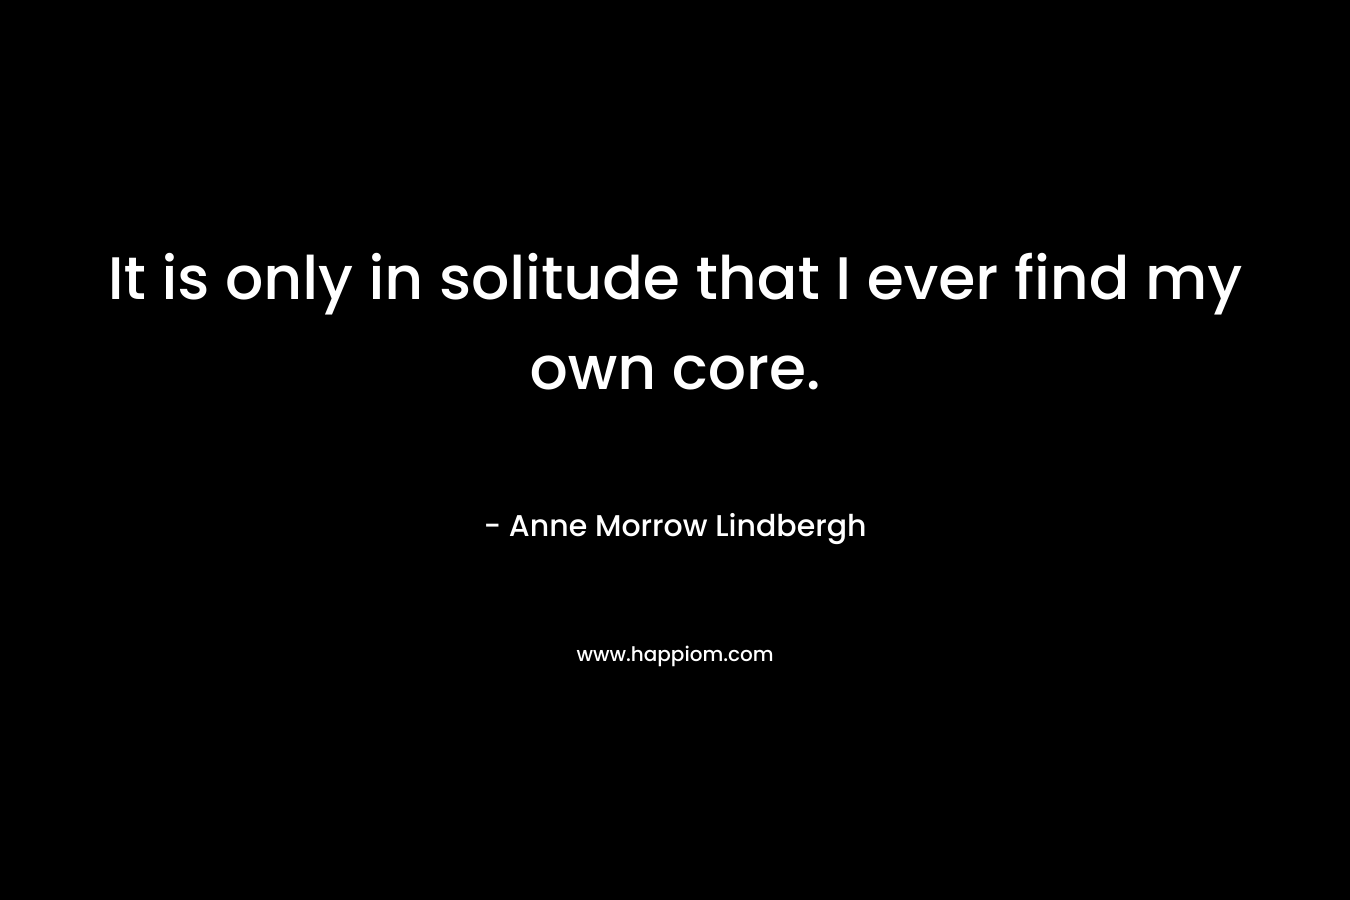 It is only in solitude that I ever find my own core. – Anne Morrow Lindbergh